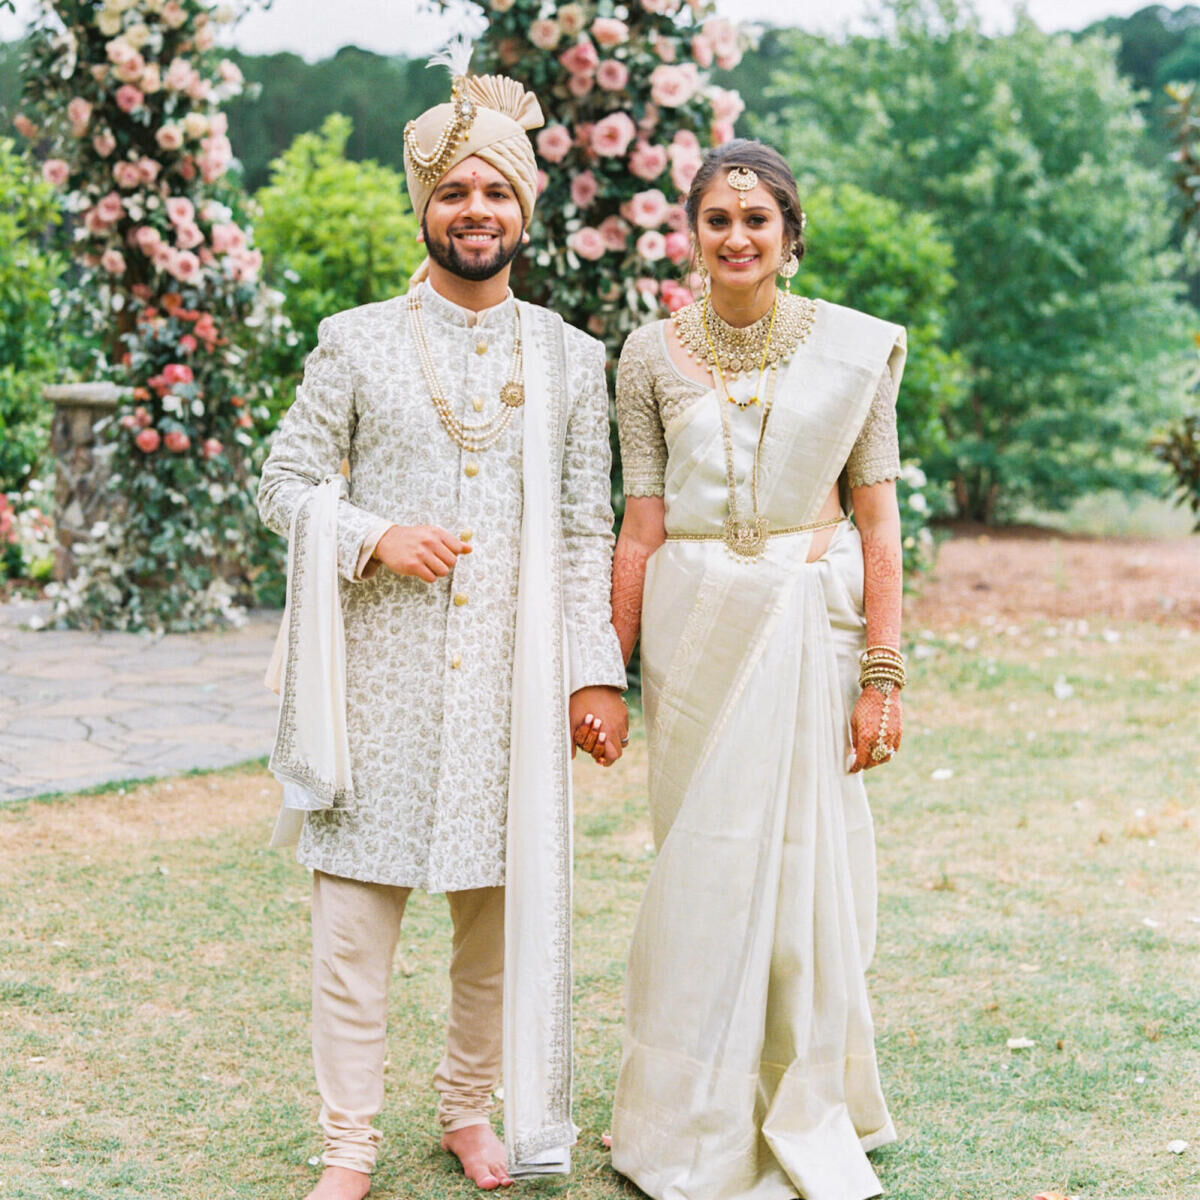 A groom and bride in front of their pink-and-white mandap at their destination Indian wedding ceremony in Raleigh, North Carolina.